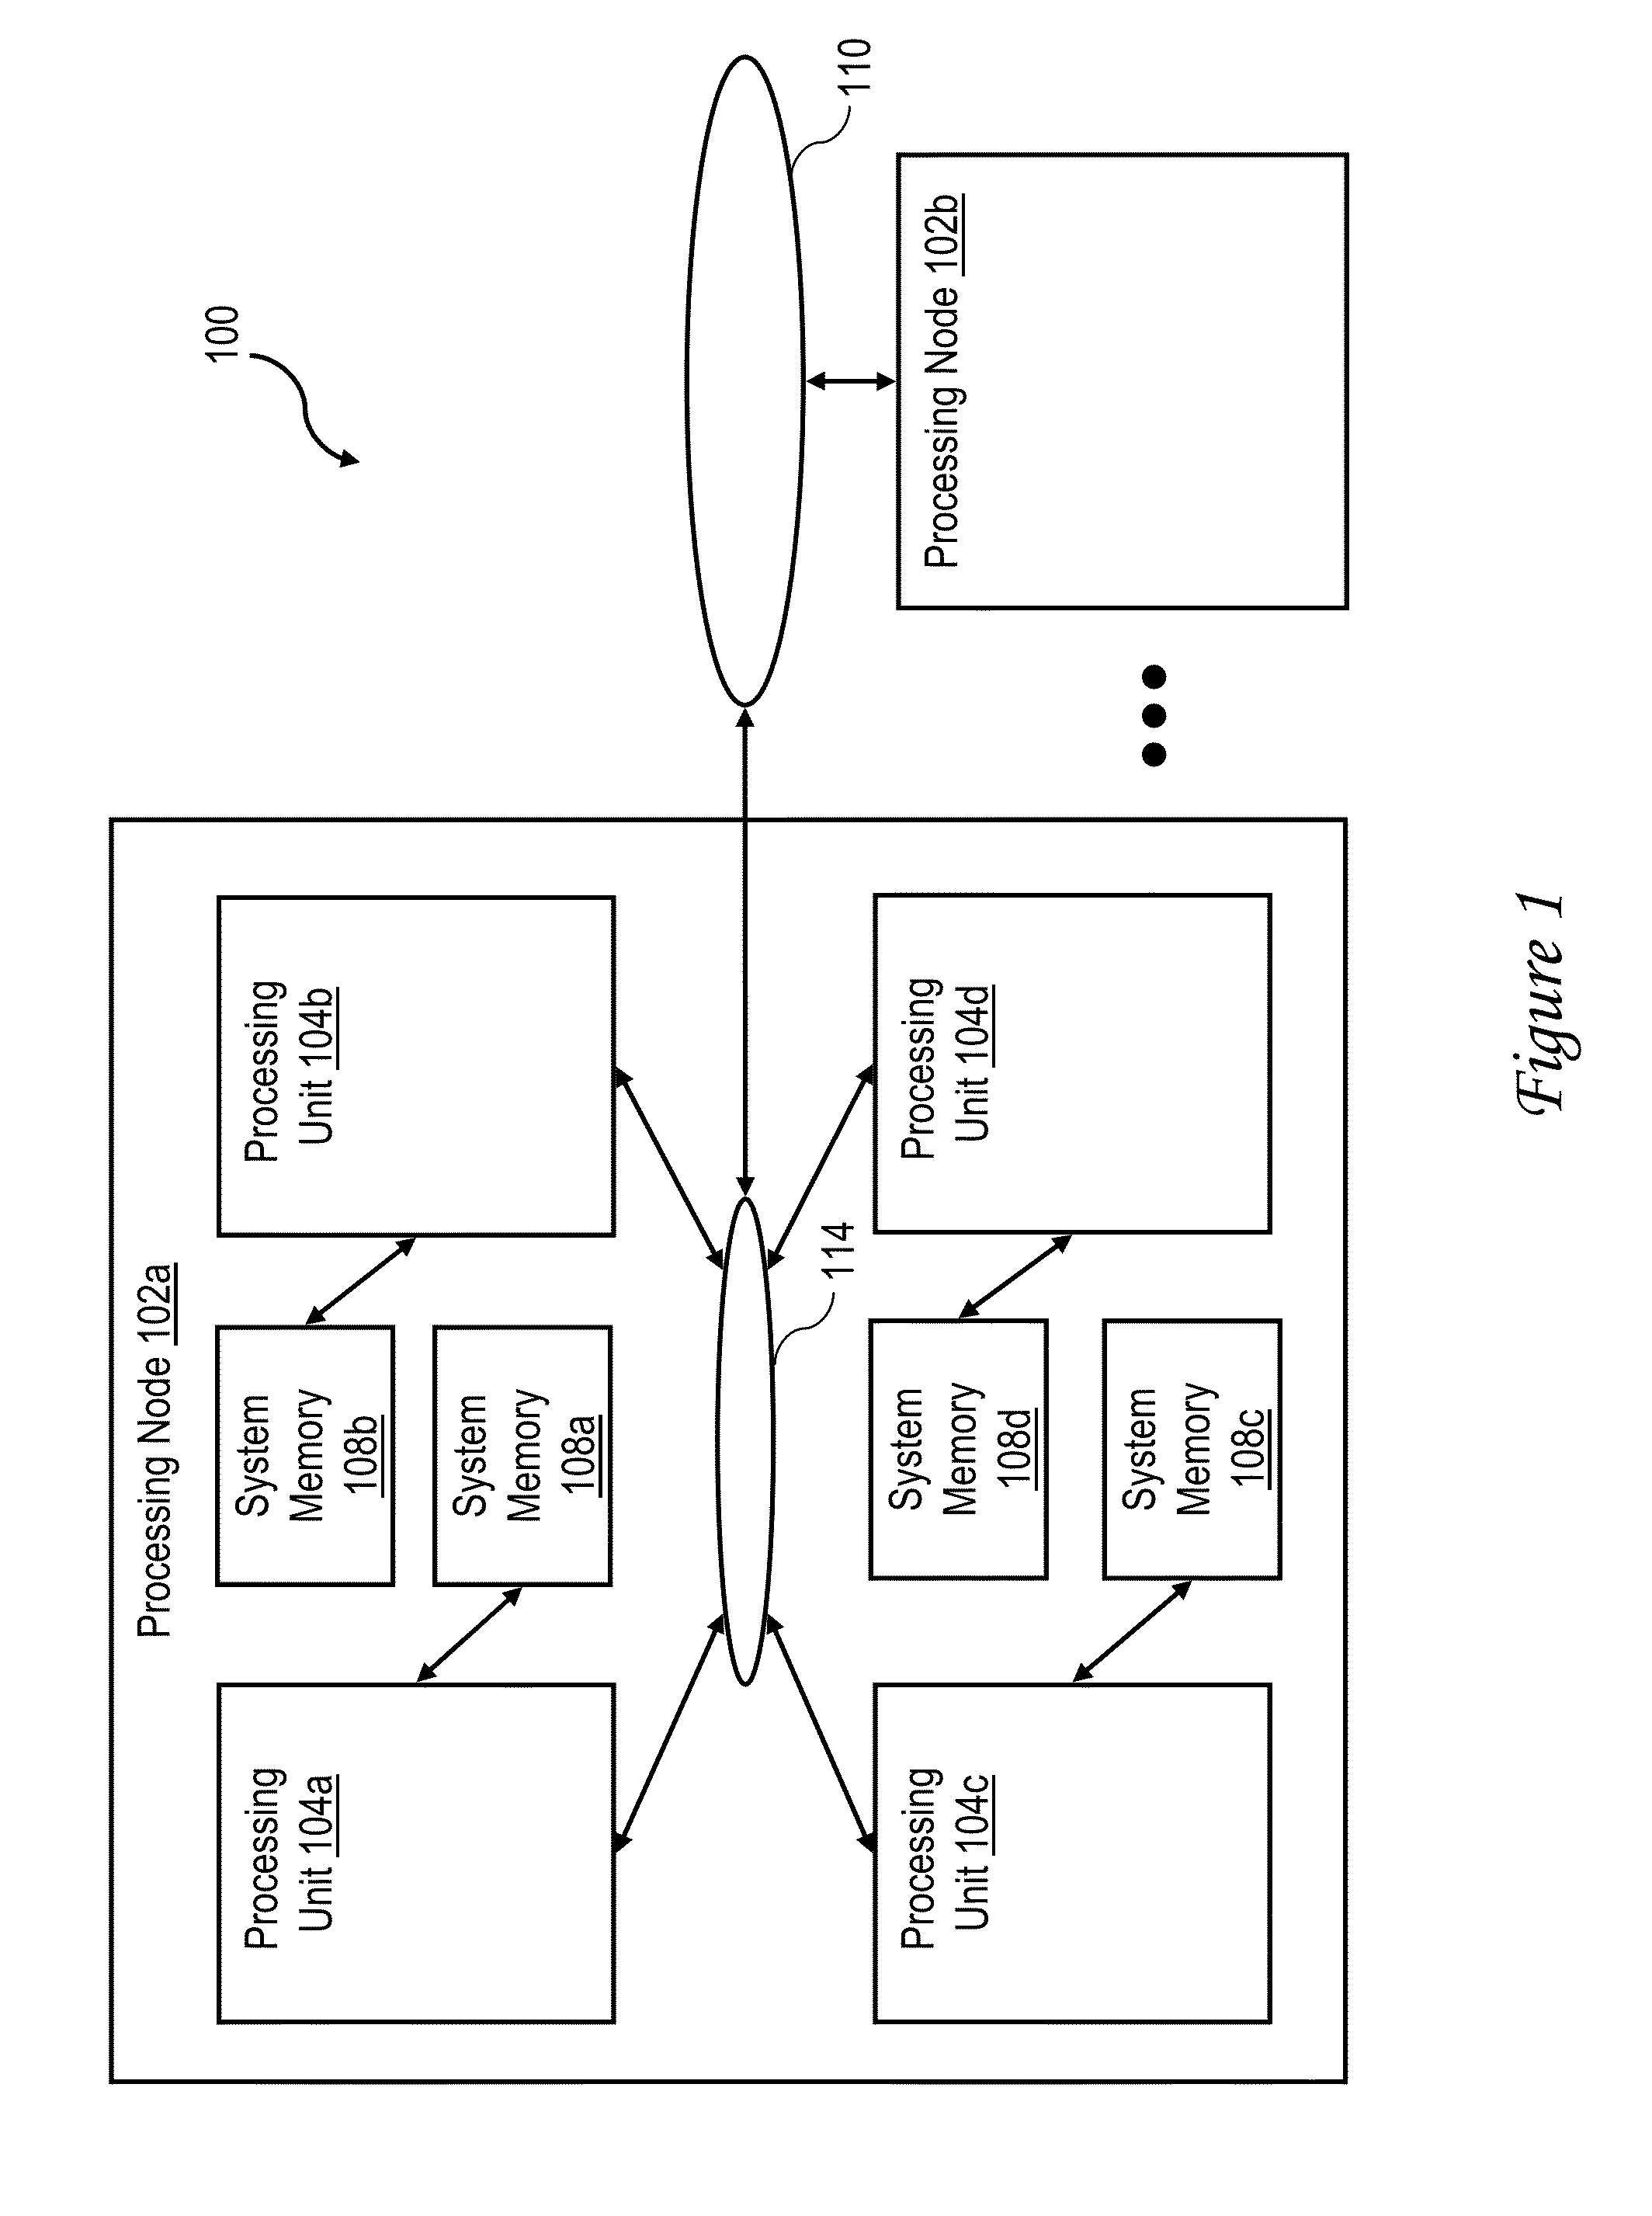 Rewind only transactions in a data processing system supporting transactional storage accesses